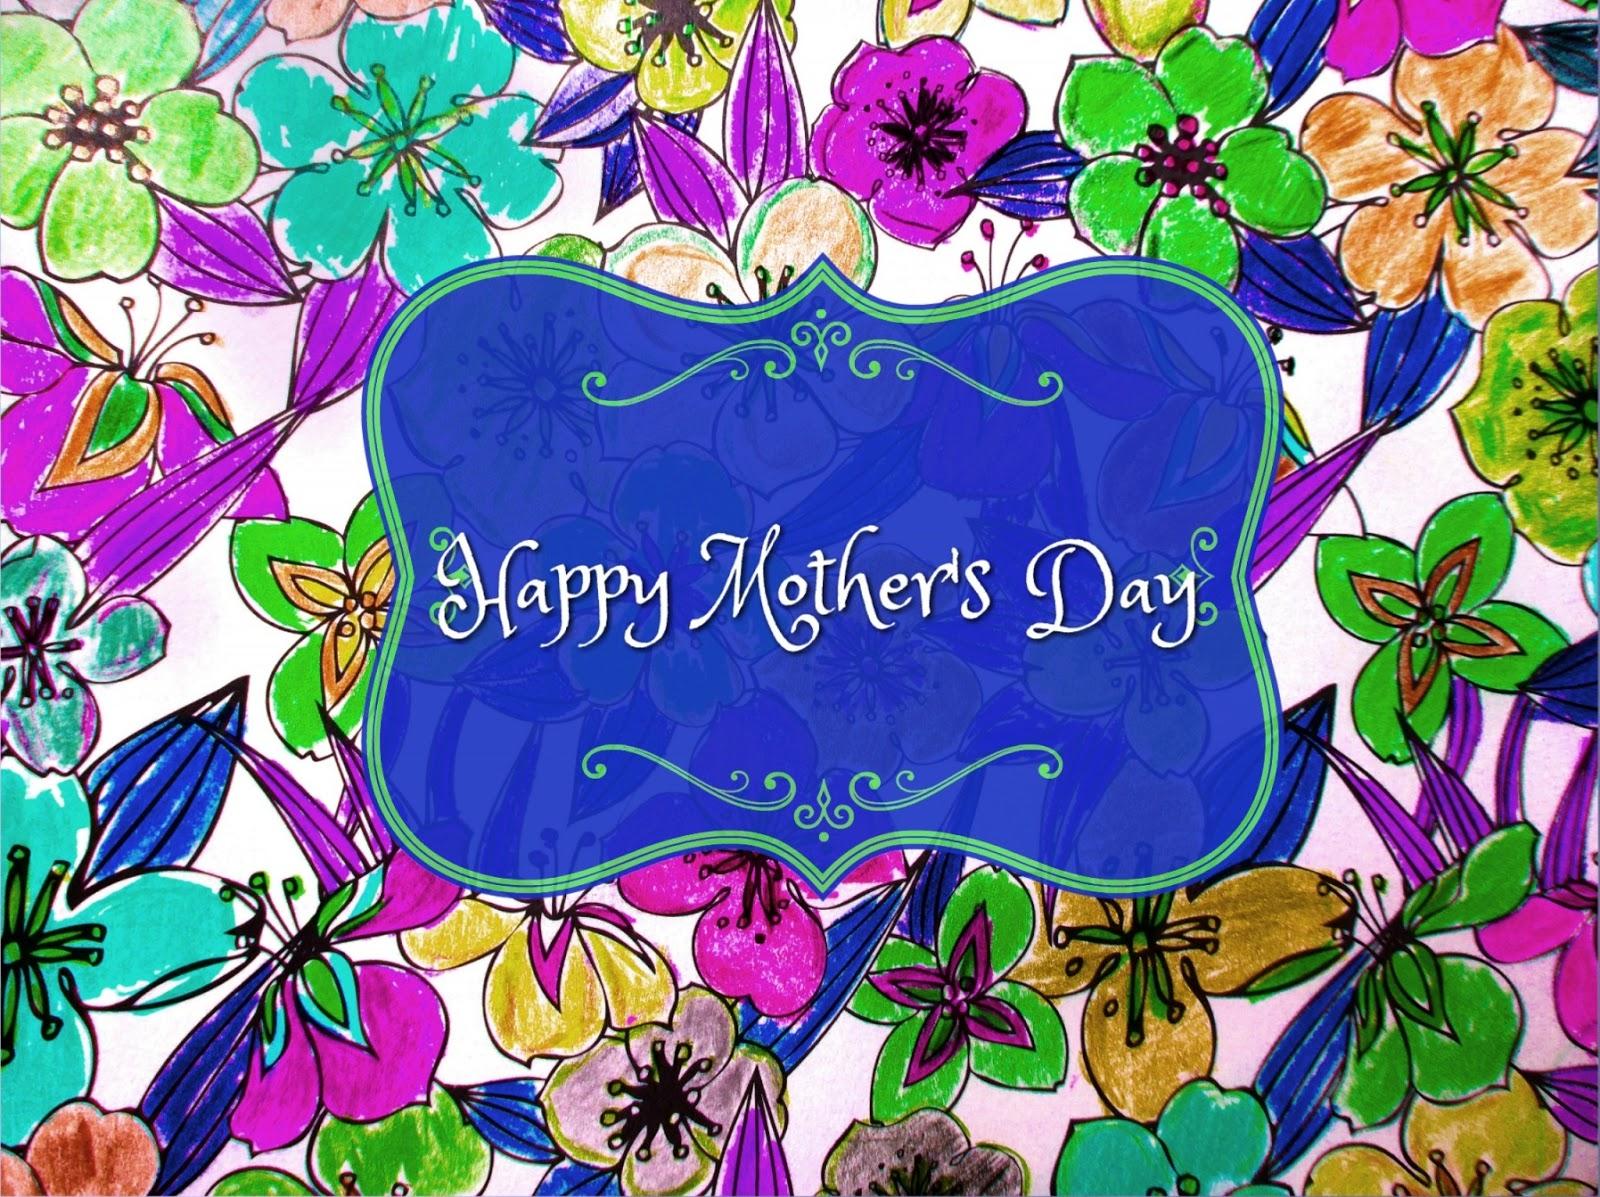 Happy Mother's Day 2020 Image Photo Picture HD Download